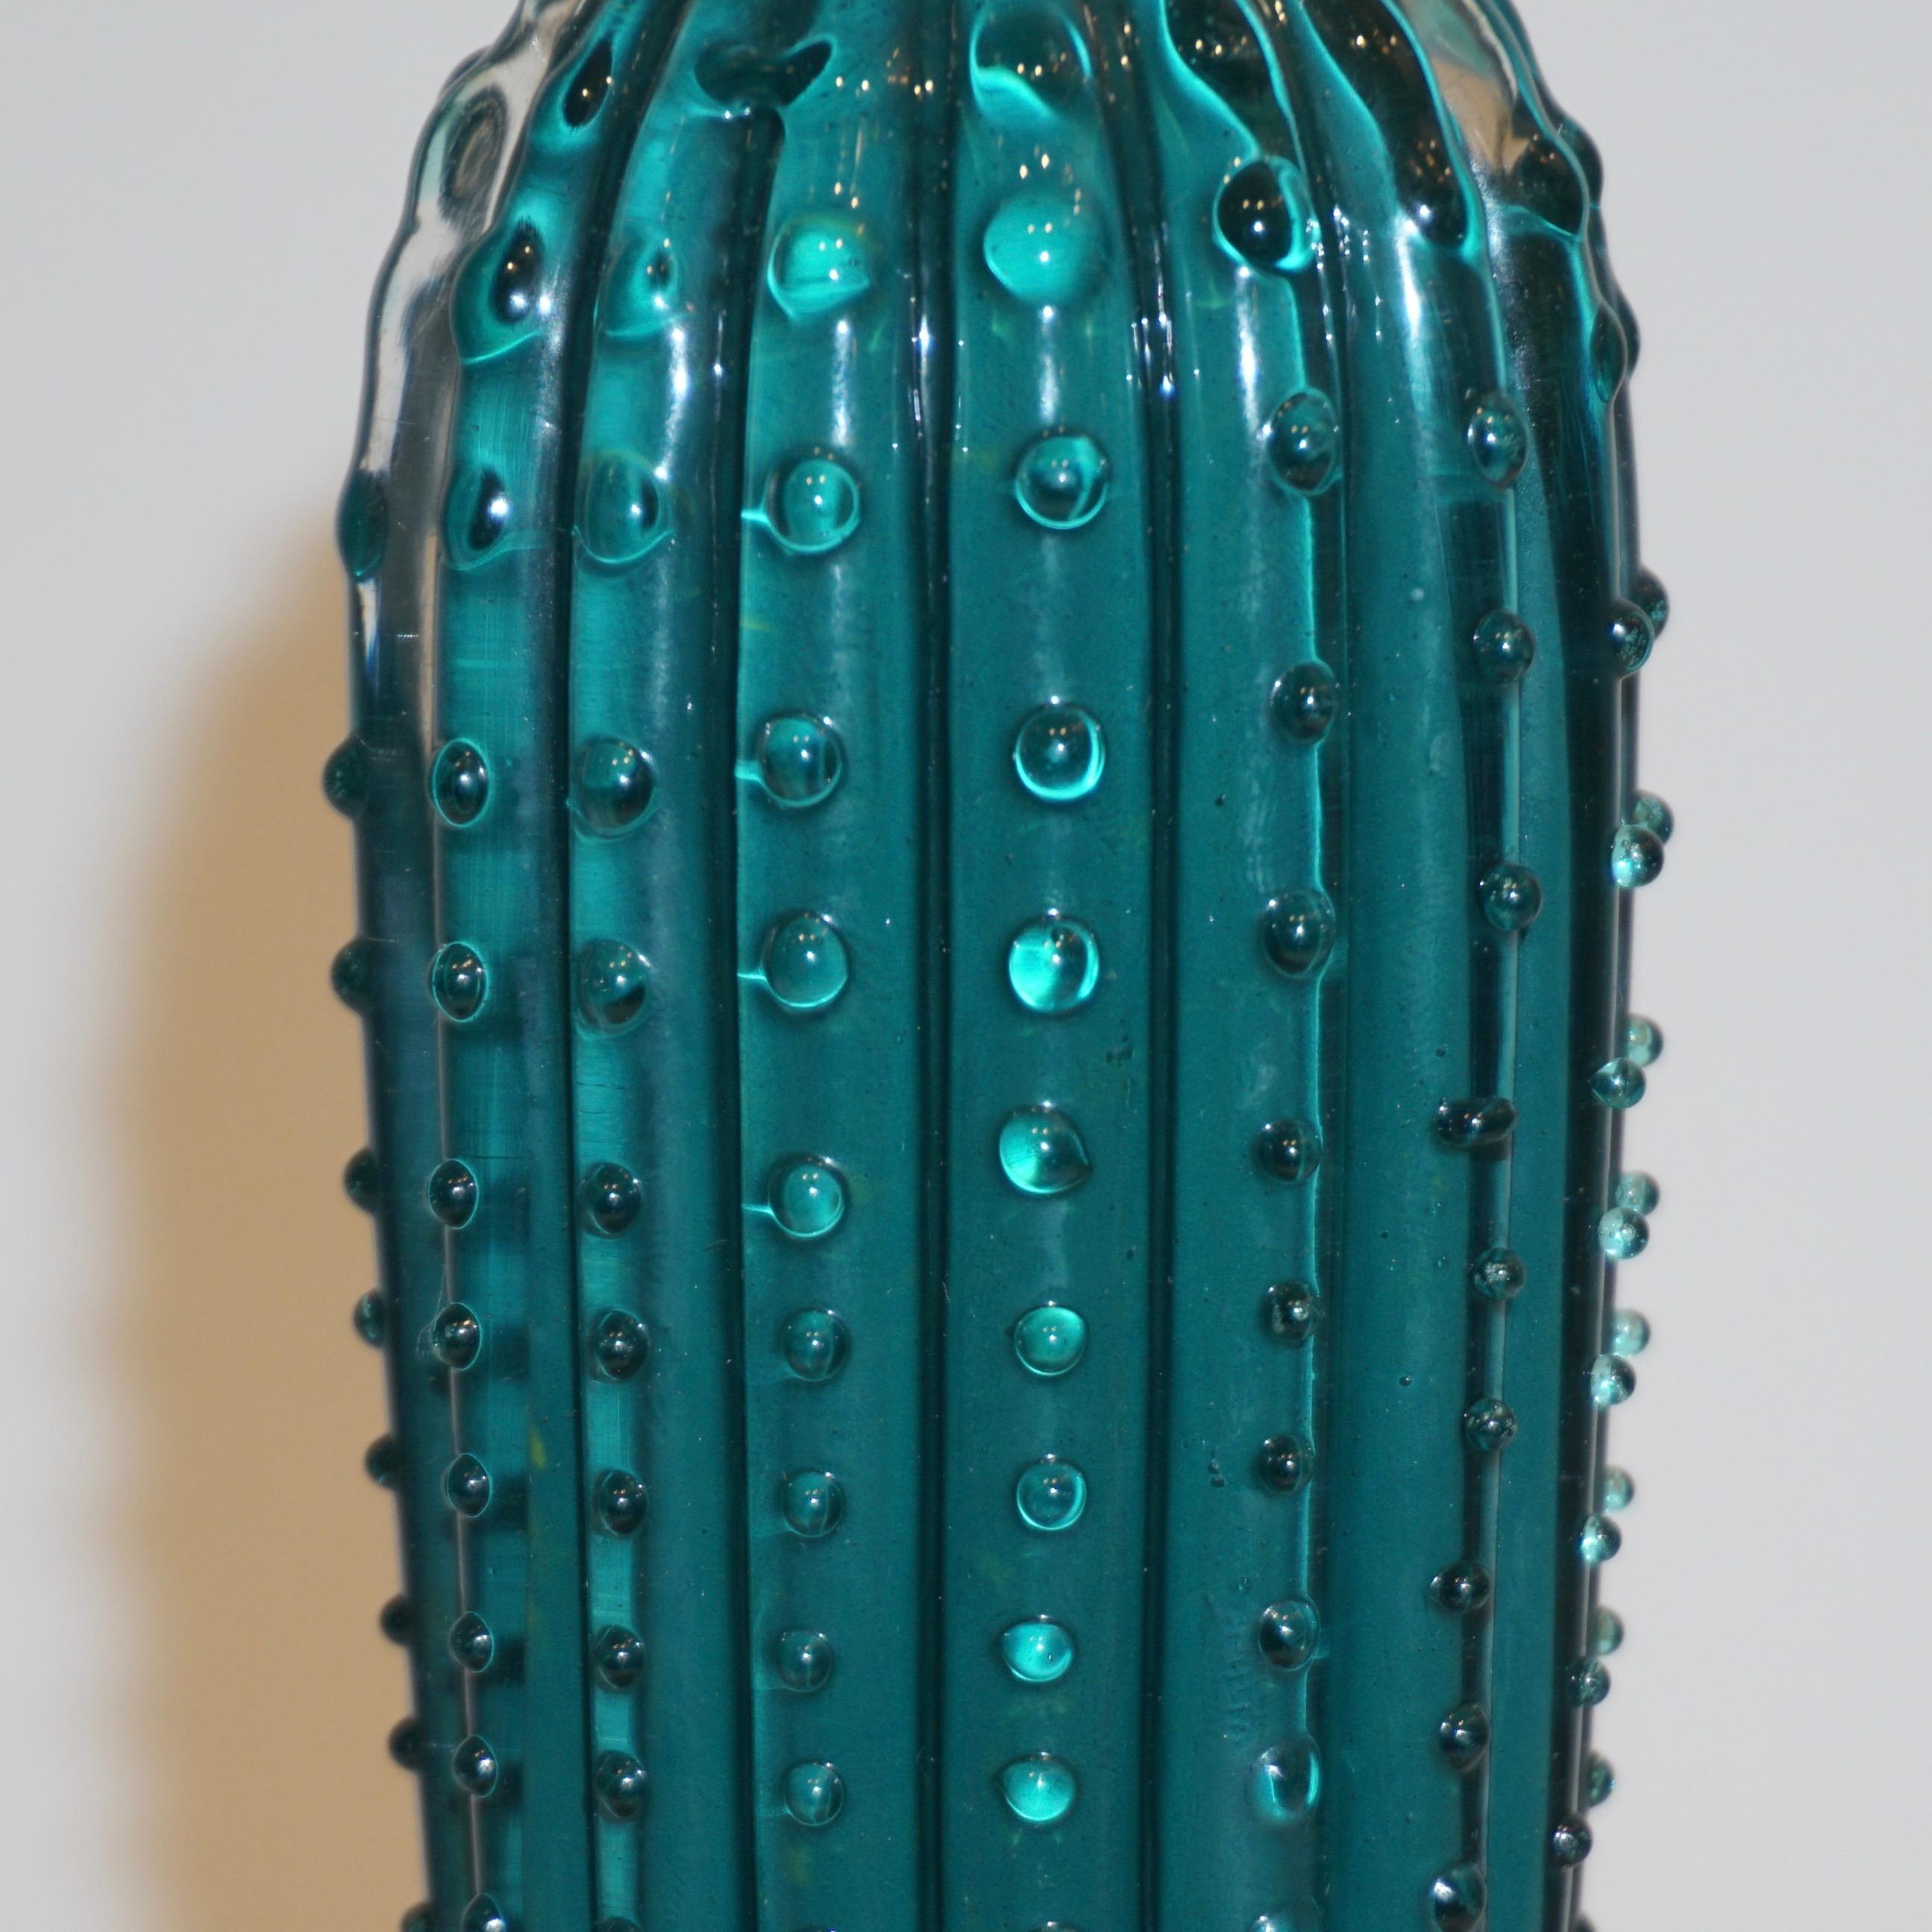 1990 Italian highly collectible blown glass cactus of limited edition by Formia, entirely handcrafted in Murano with modern Minimalist design, in a lifelike organic modernist shape in overlaid teal turquoise green Murano glass highlighted with